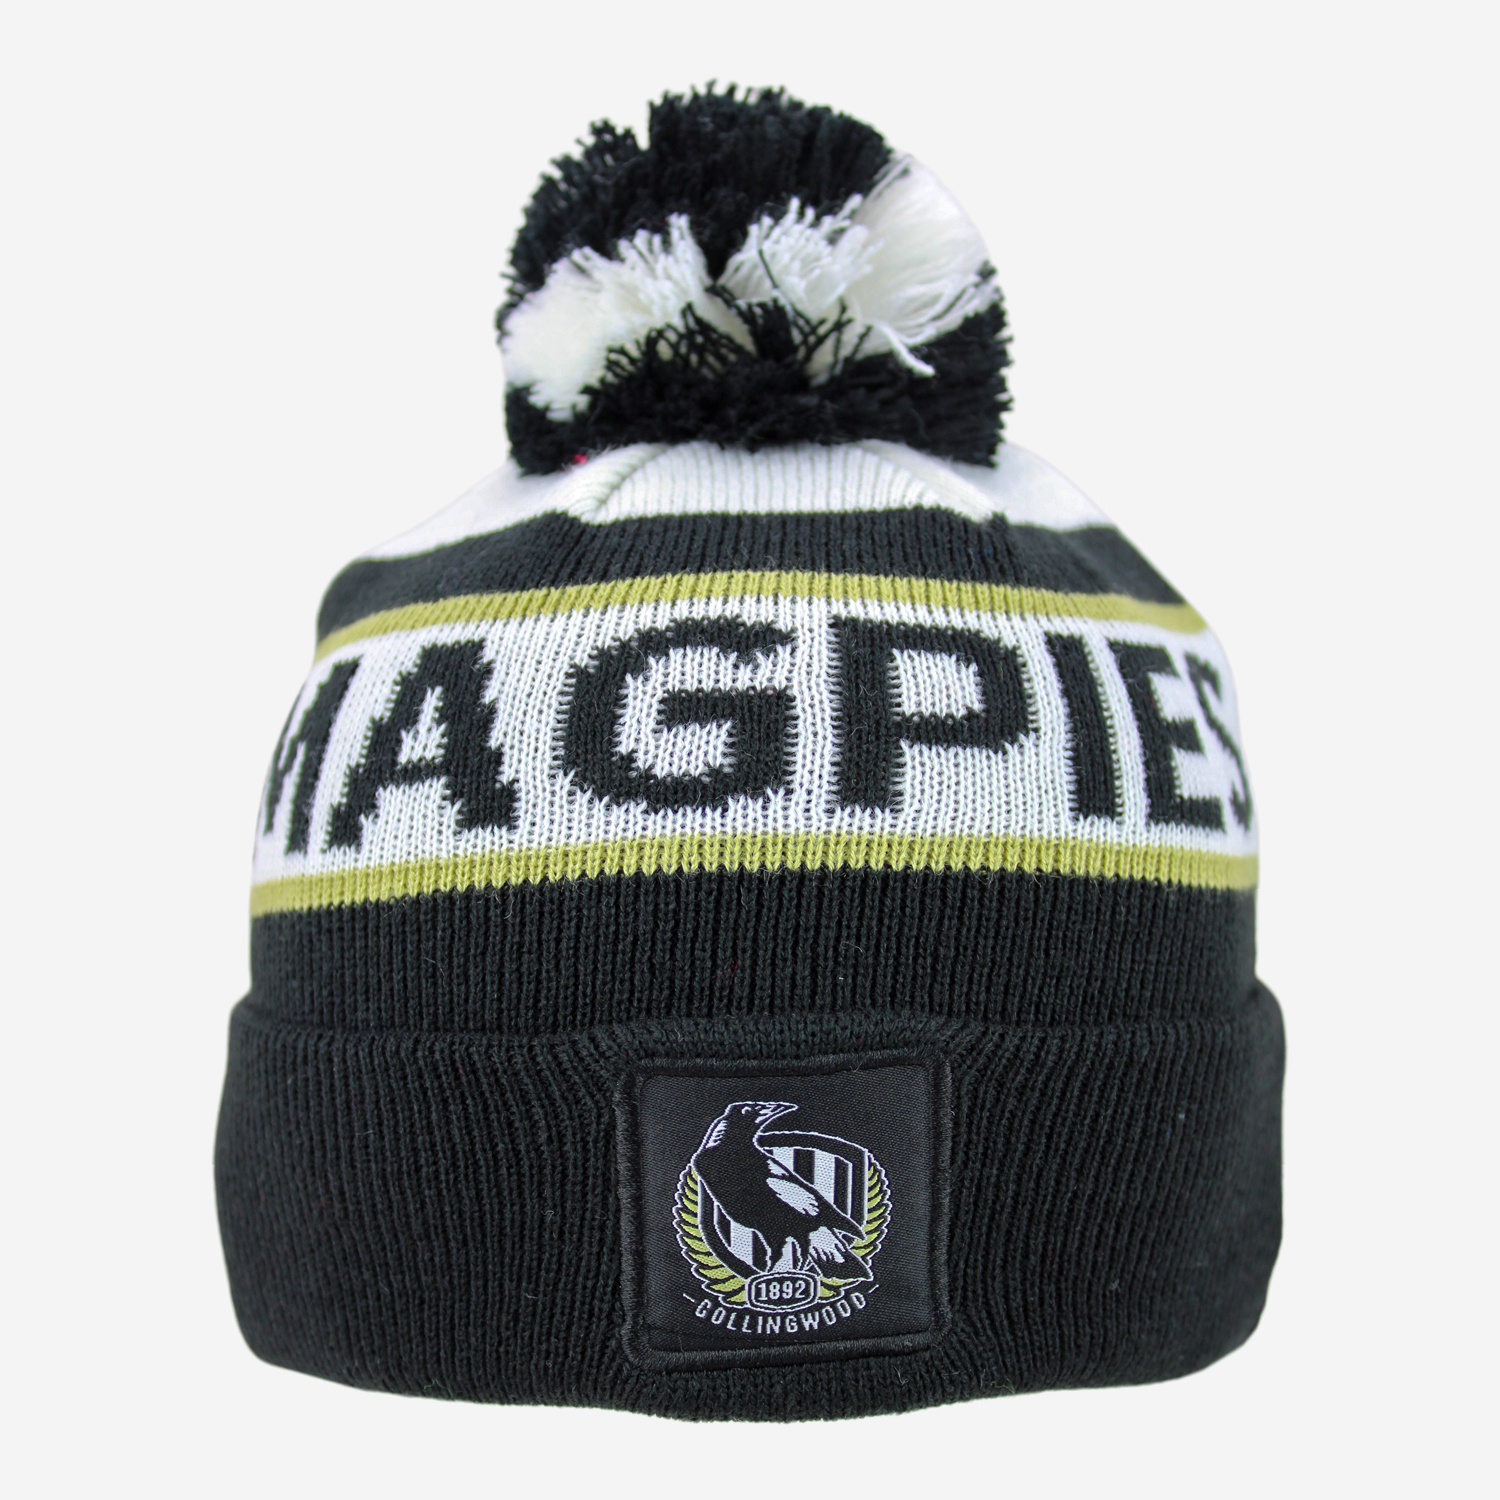 Magpies Youth Beanie